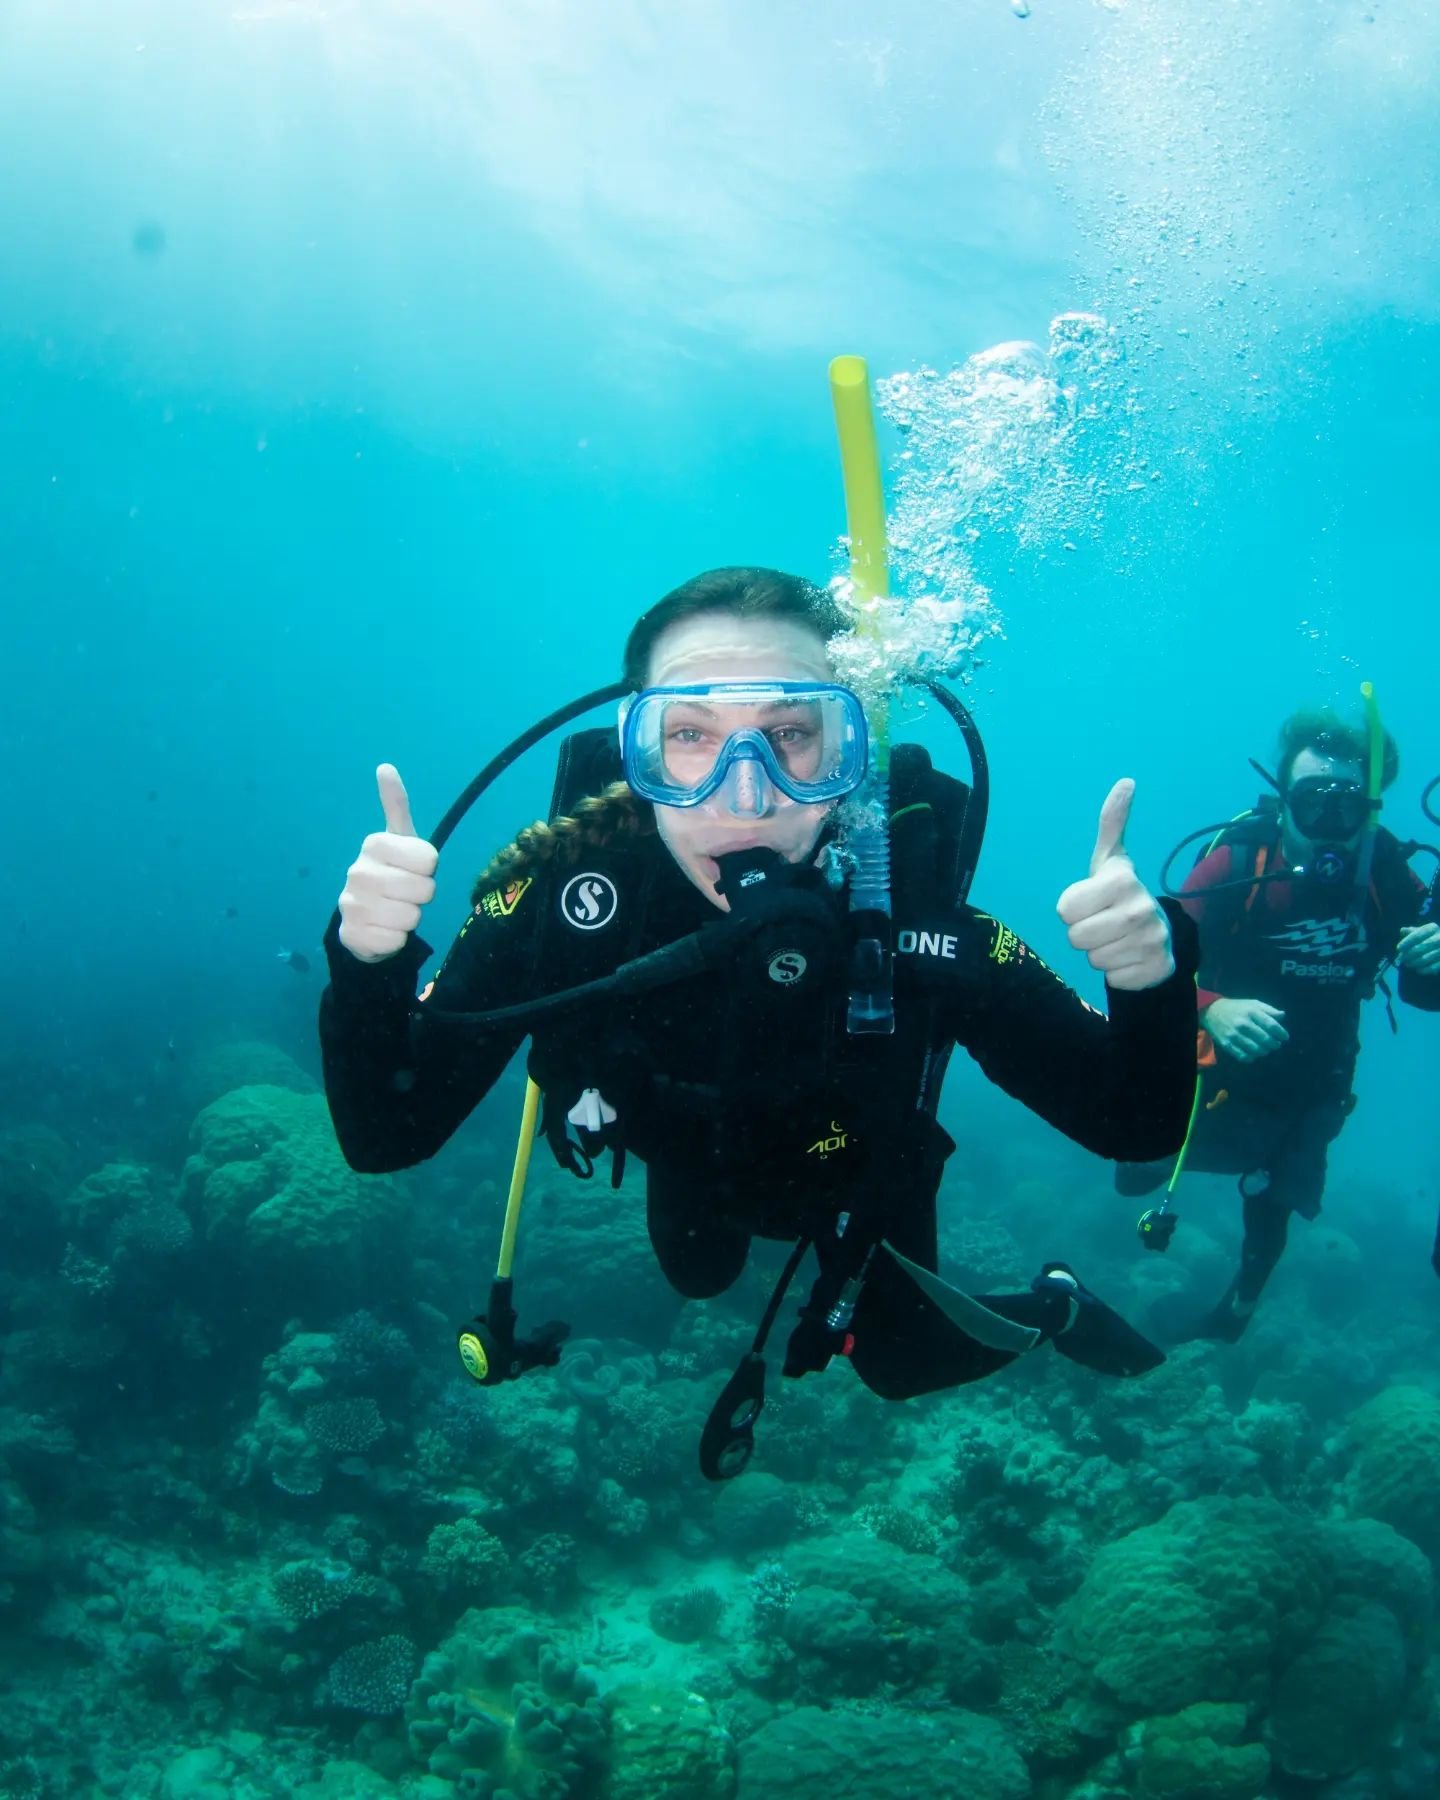 My very first scuba dive and I did it in the Great Barrier Reef ! Now that's pretty cool ! 🐟🐠🐡🪸 

#greatbarrierreef #thegreatbarrierreef #passionsofparadise #Australia #scuba #scubadive